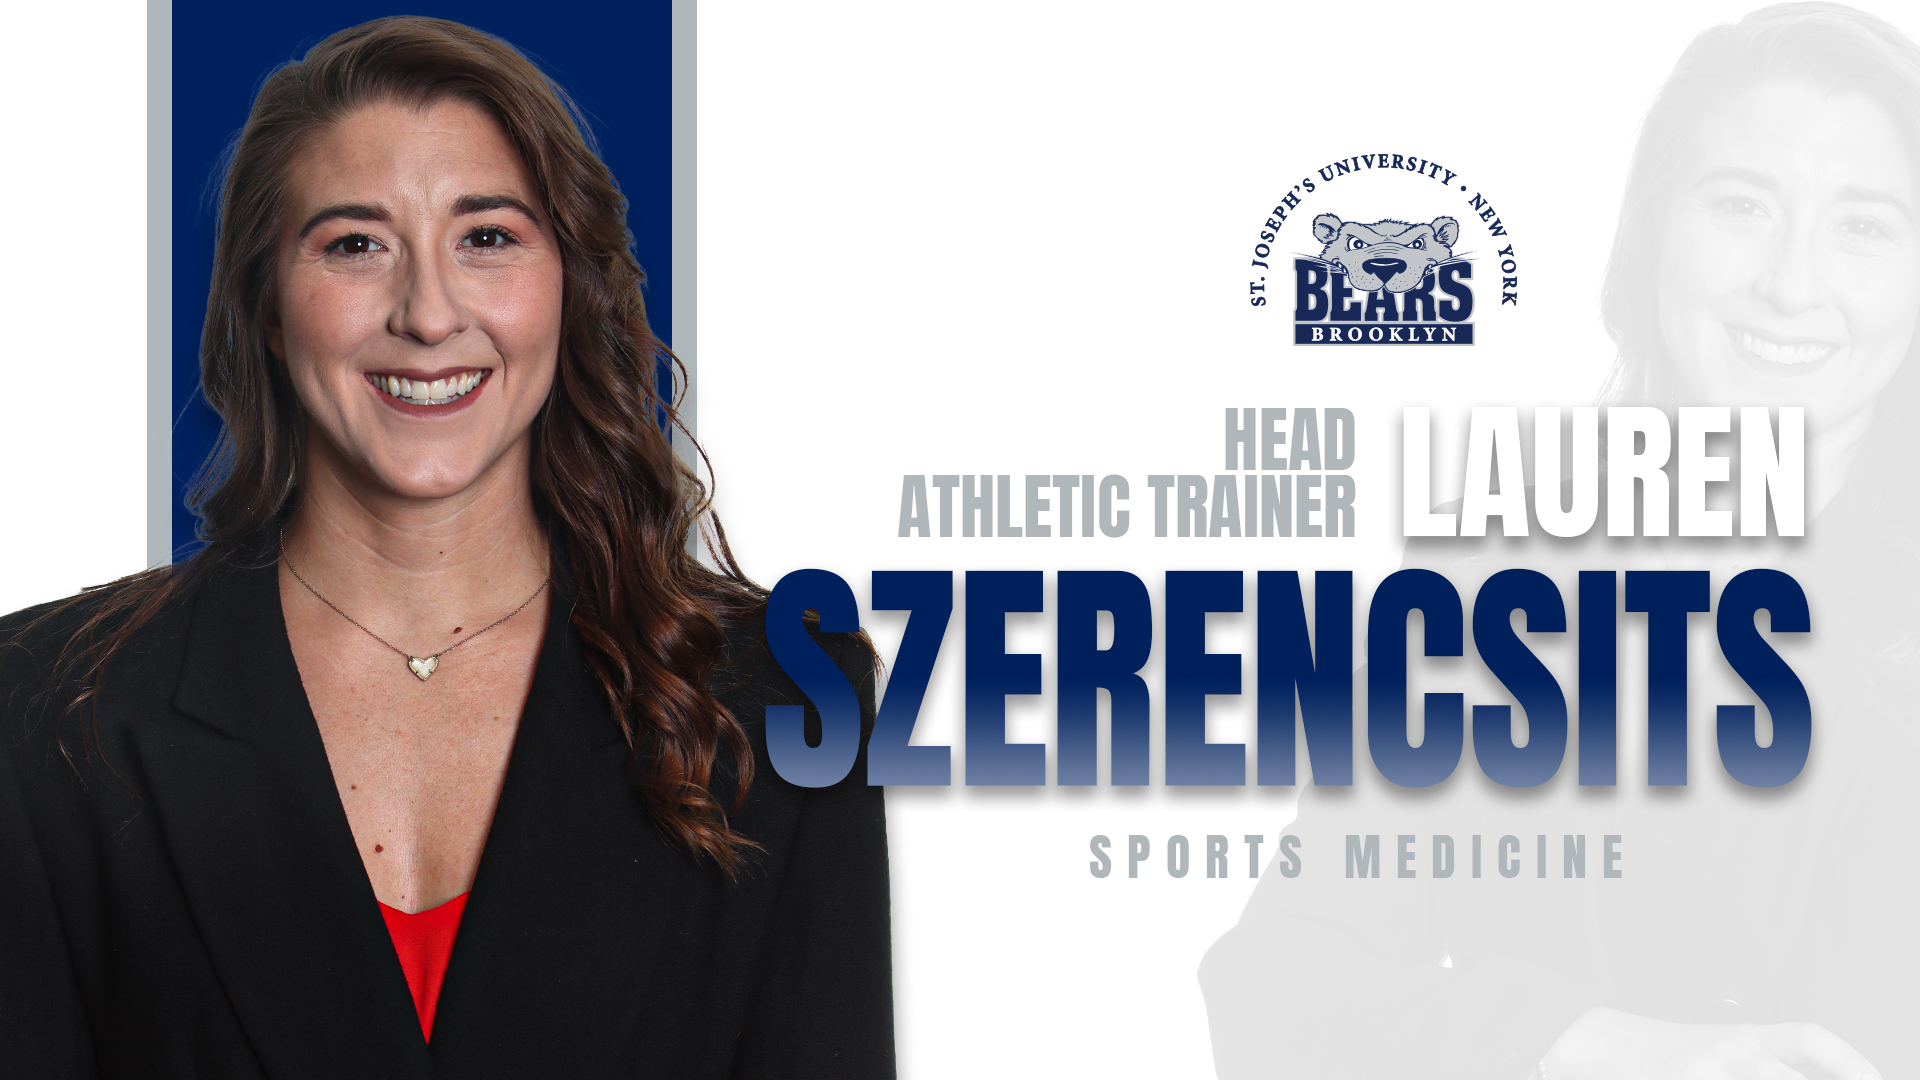 Szerencsits Named Head Athletic Trainer